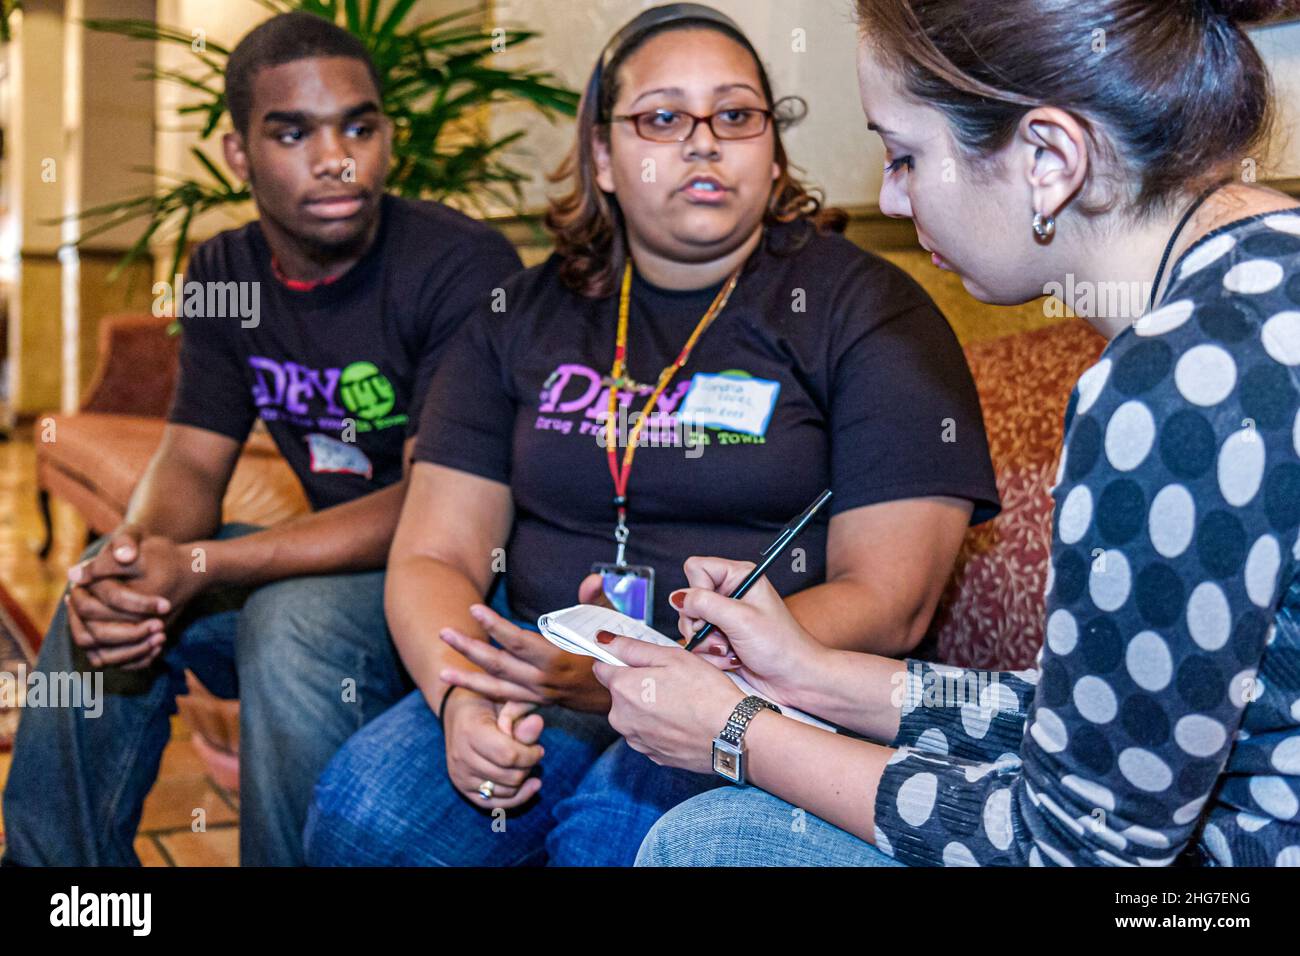 Miami Florida,Drug Free Youth In Town abuse prevention program students teens newspaper reporter interviewing,Black Hispanic boy girl asking questions Stock Photo